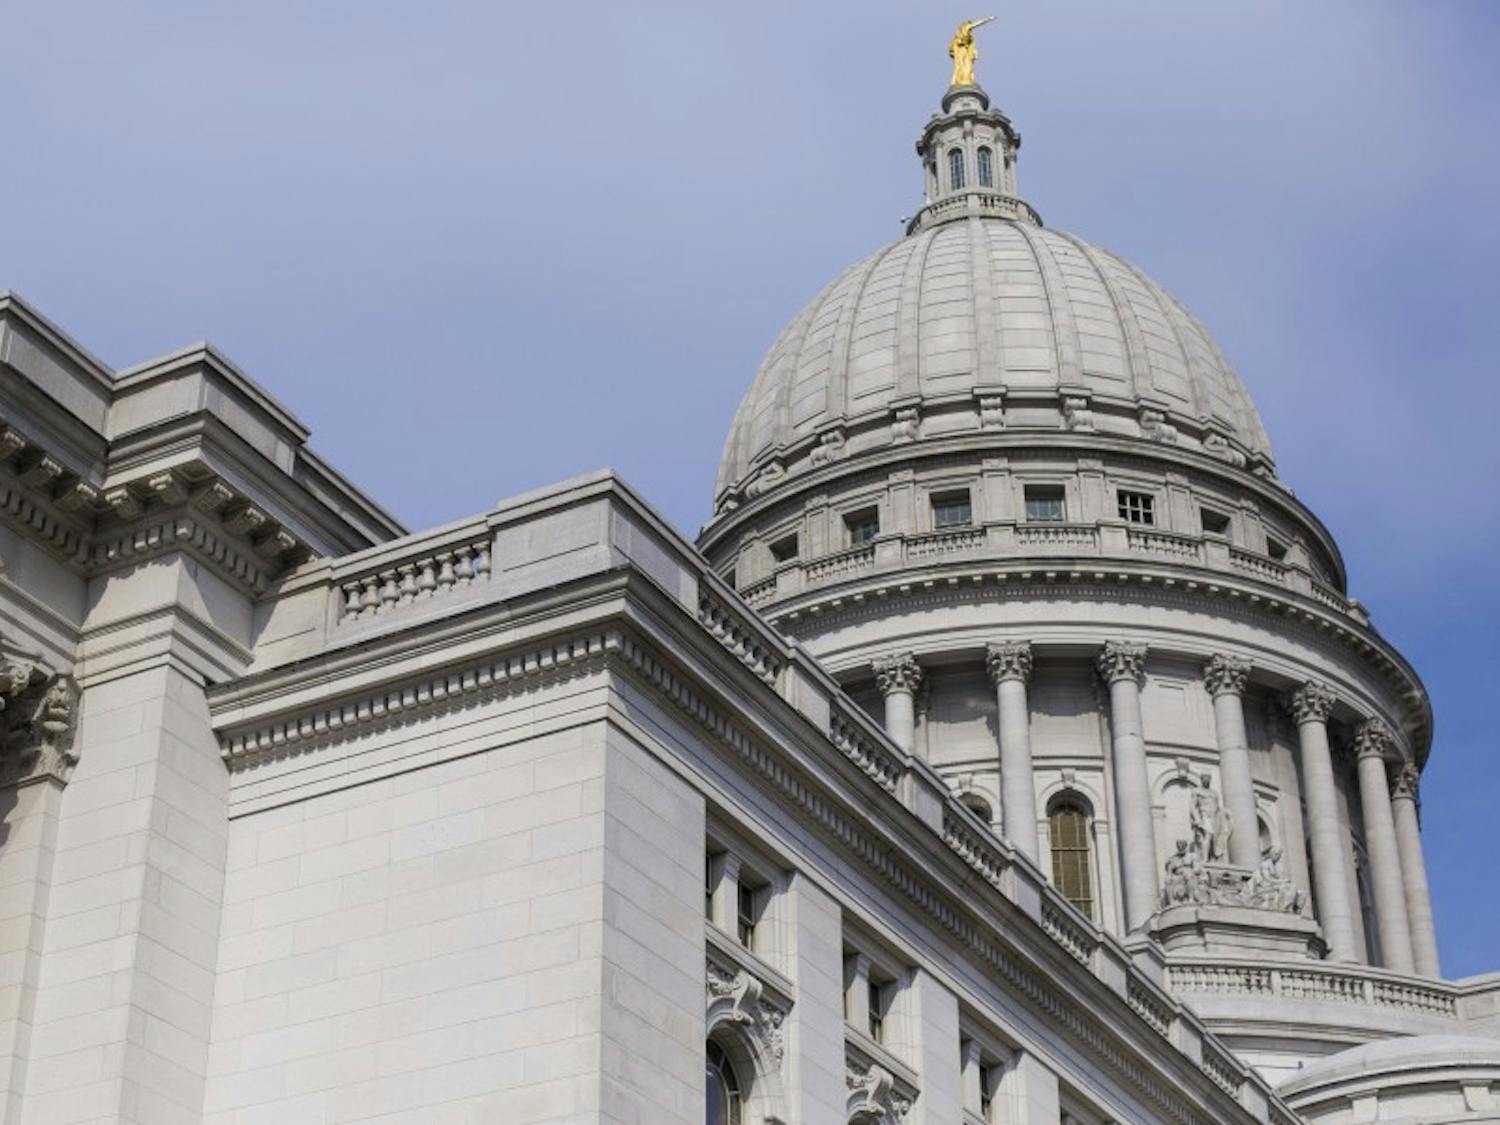 A bill to sell Green Bay Correctional prison and buy a new prison in another county was up for public debate Thursday.